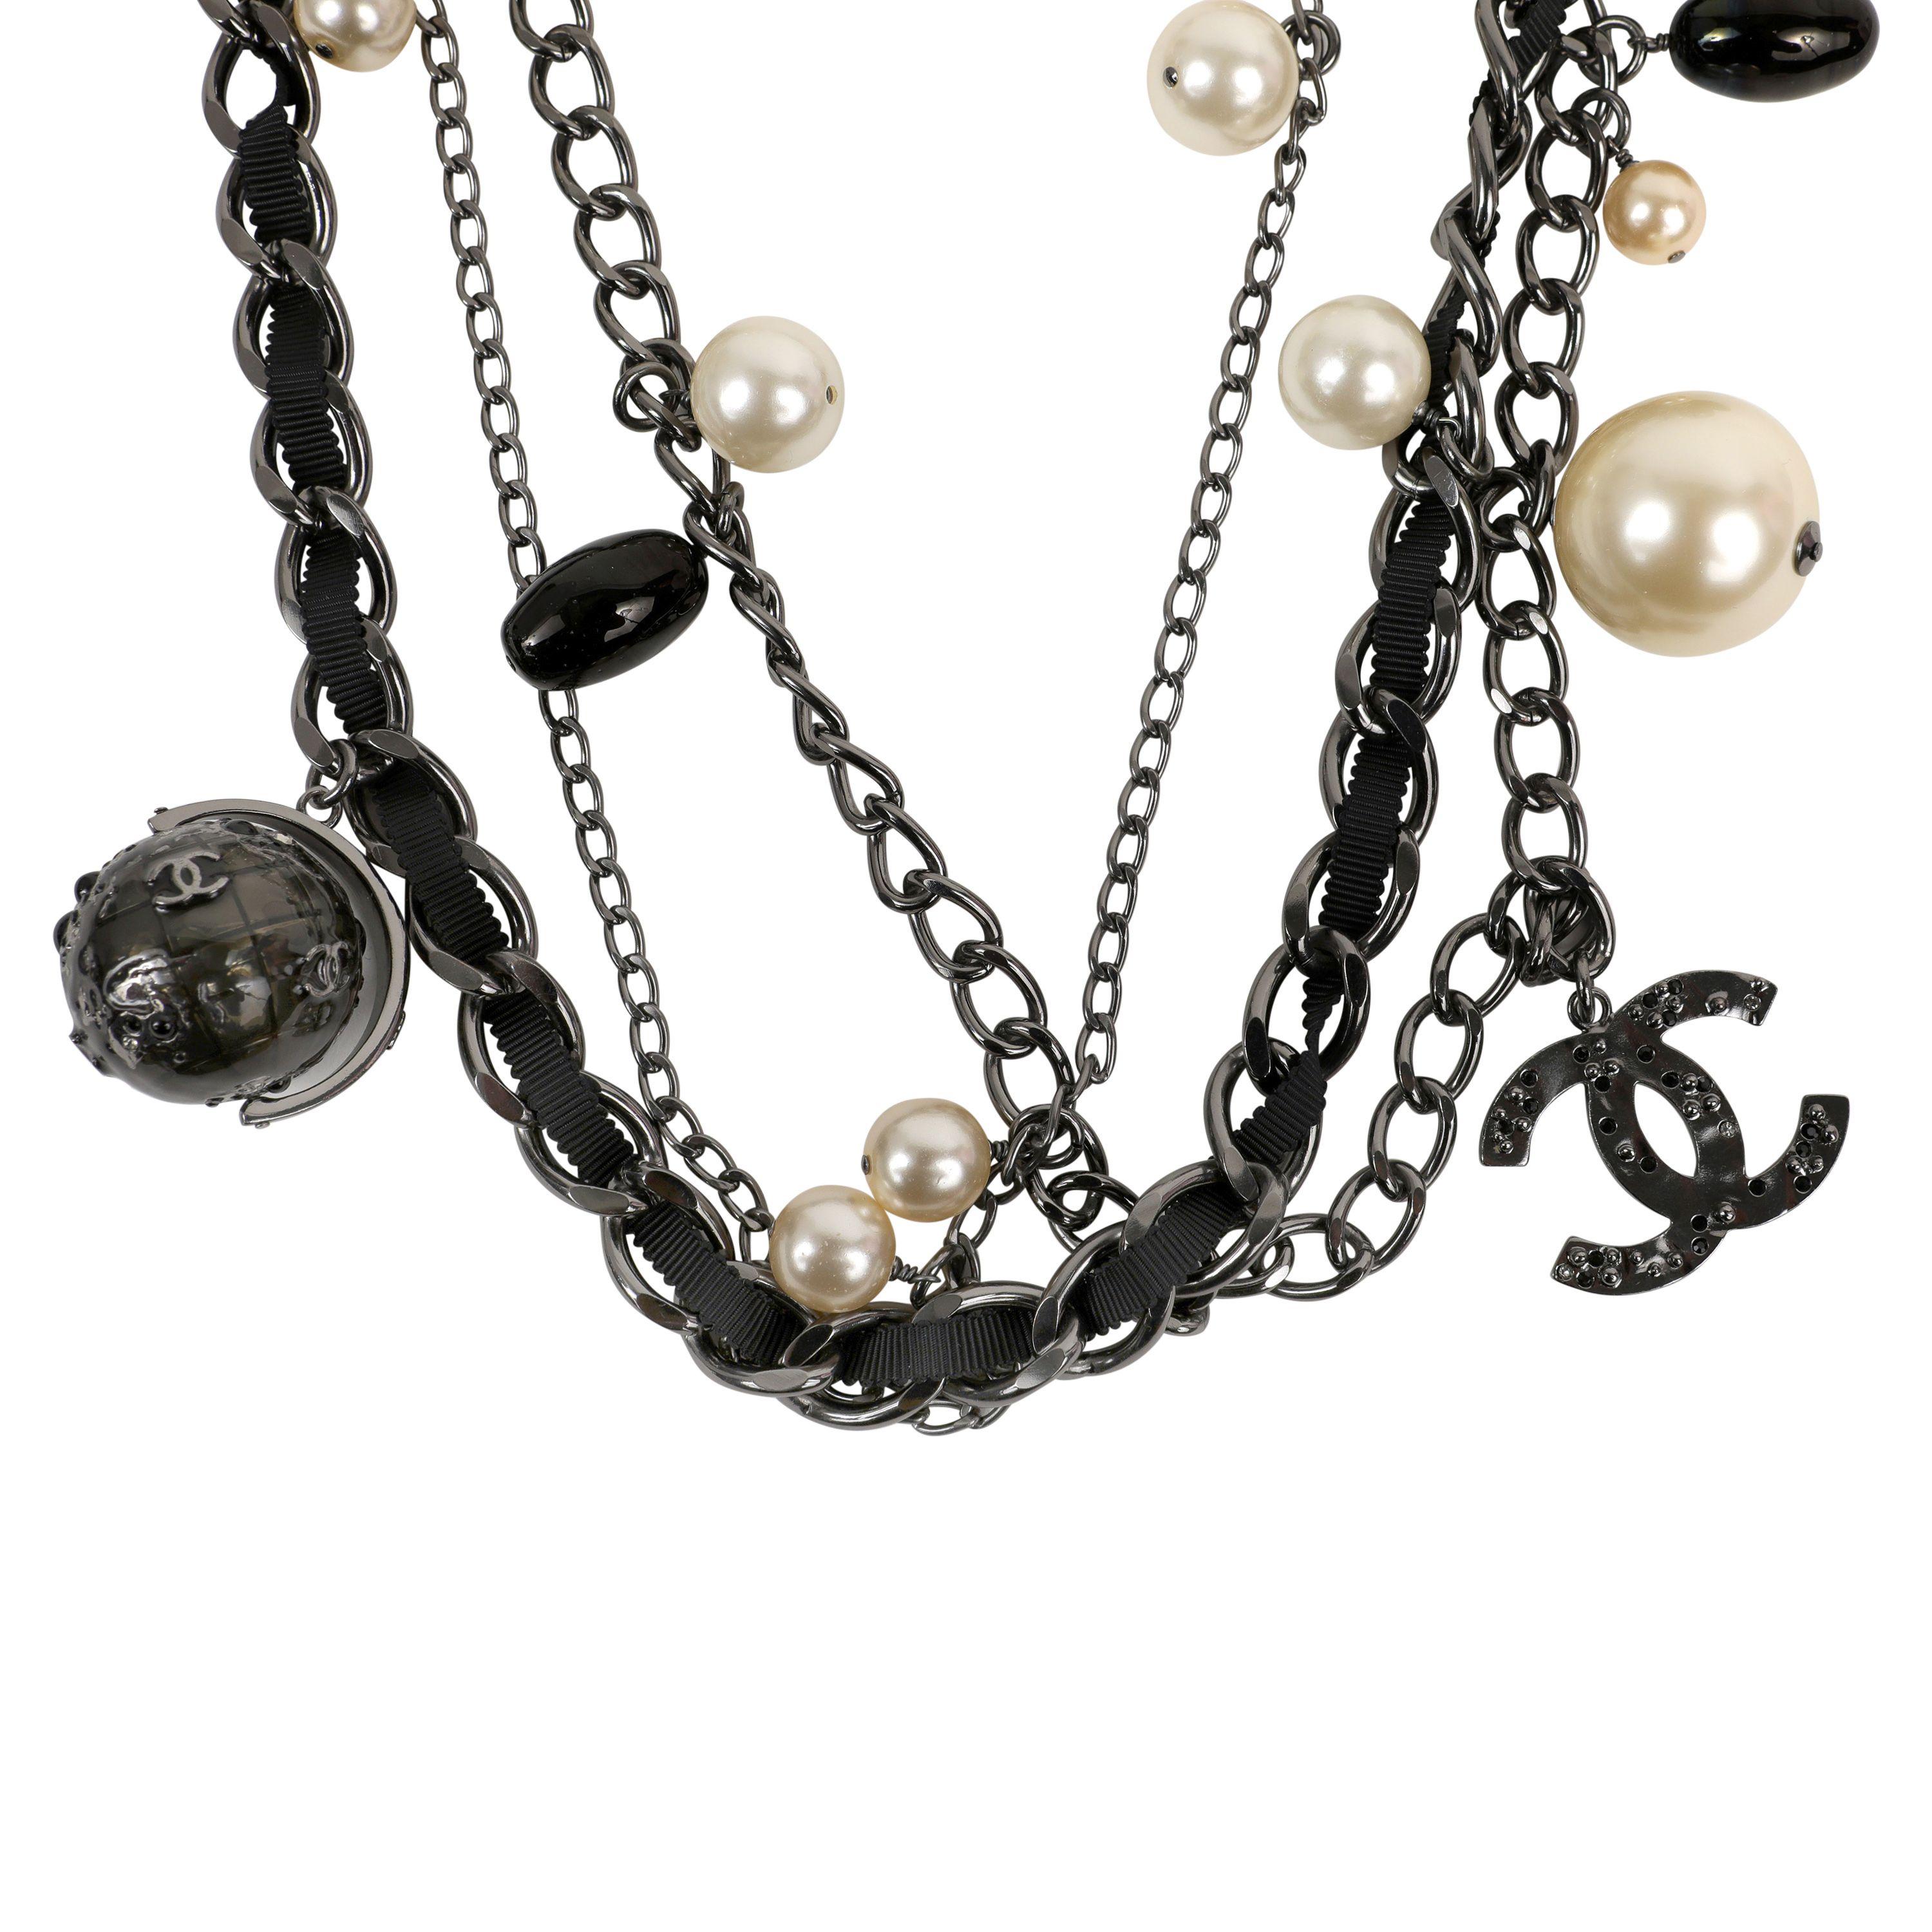 Chanel Ruthenium Globe Multi Chain Necklace with Pearls In Excellent Condition For Sale In Palm Beach, FL